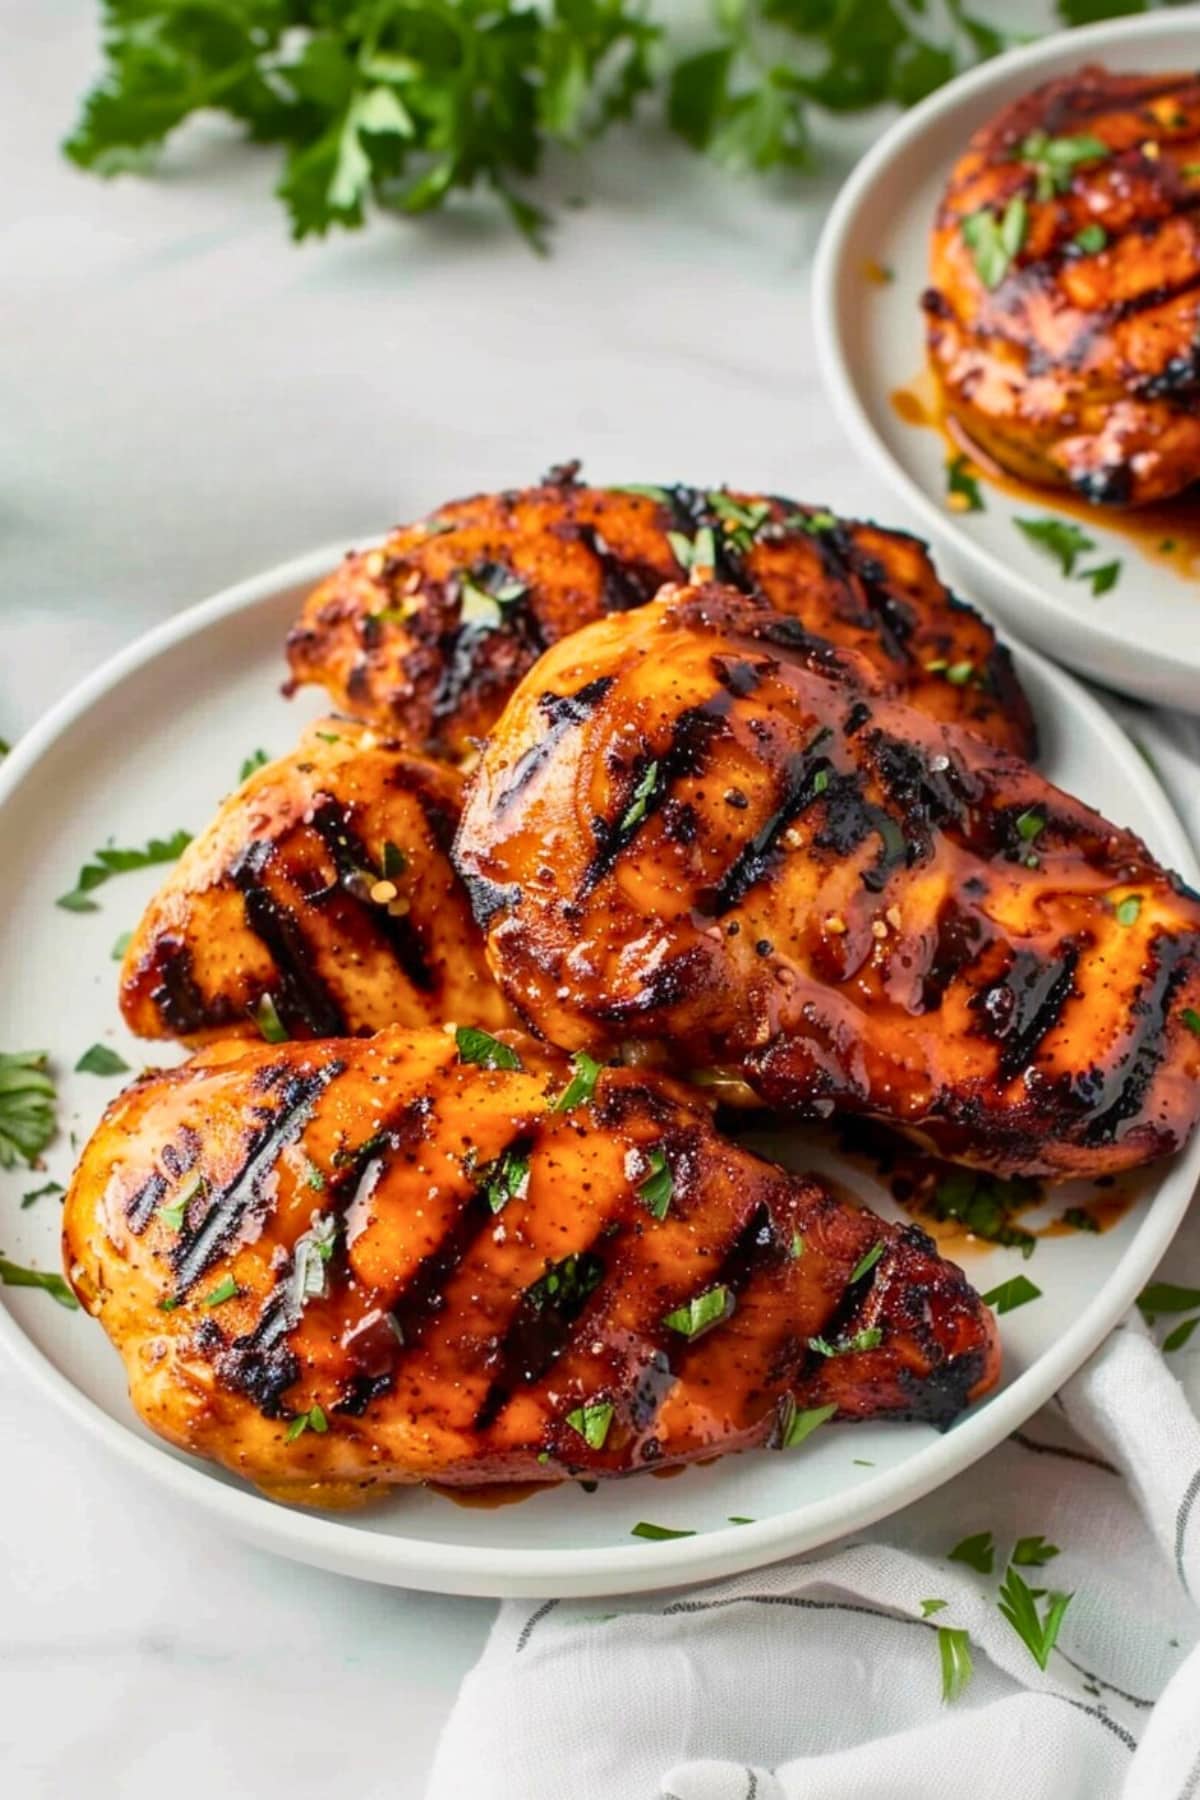 Grilled chicken breast brushed with barbecue sauce served on a white plate.